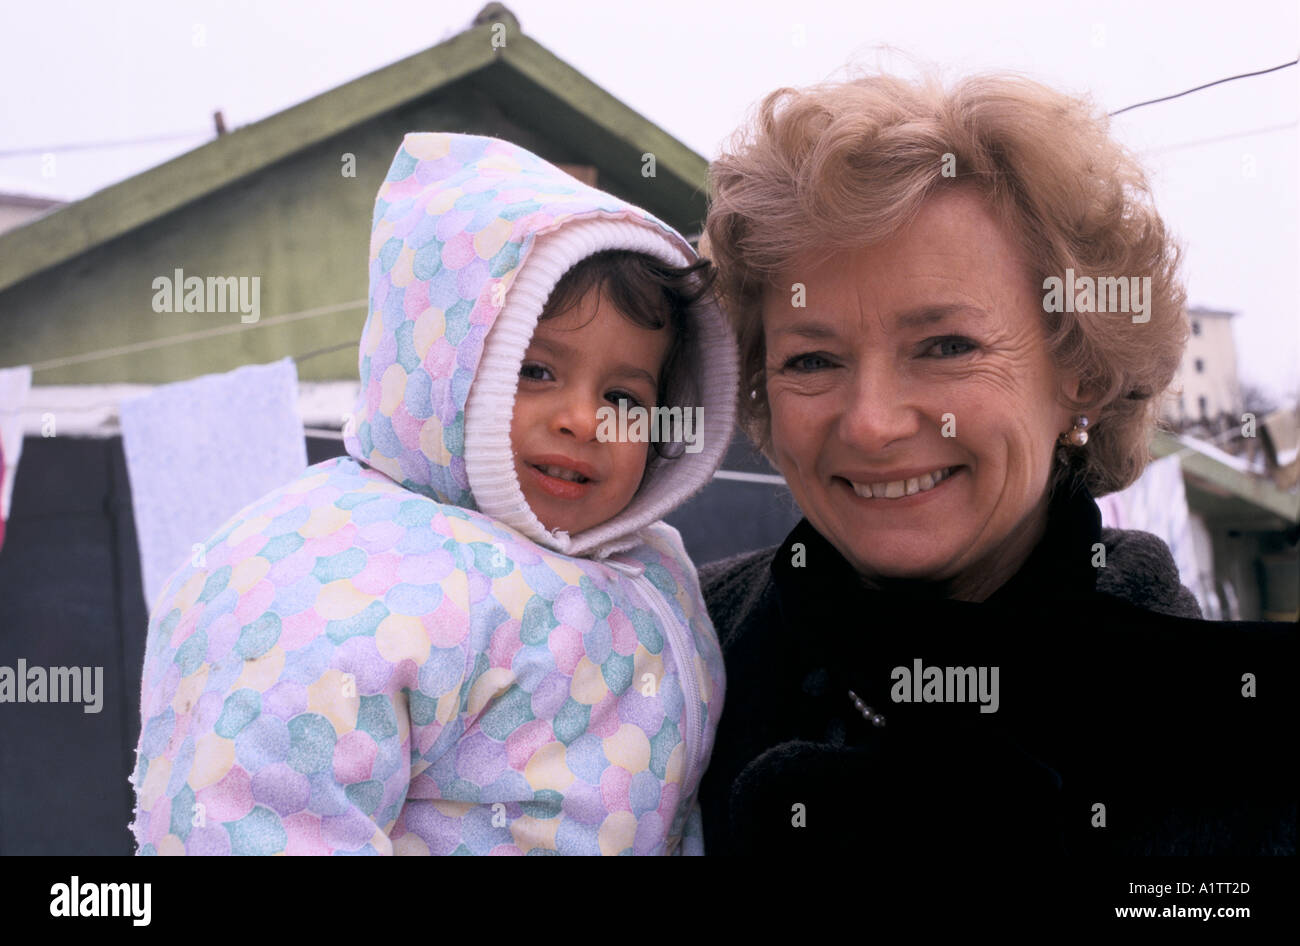 GLENYS KINNOCK IN ROMANIA HOLDING A CHILD WITH AIDS 1996 Stock Photo